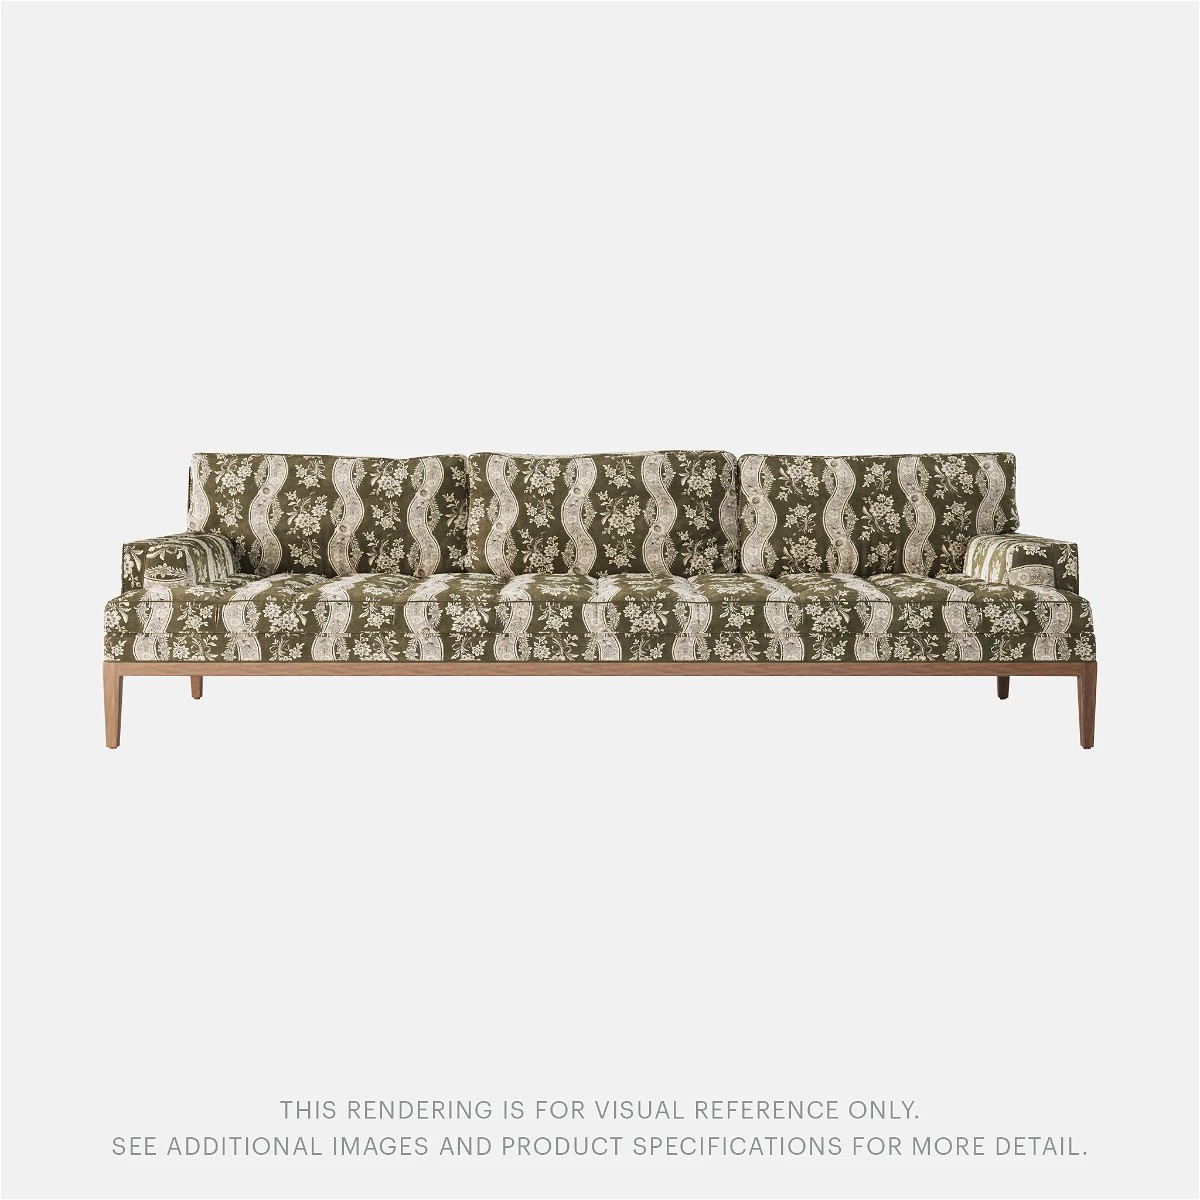 The image of an Forster Sofa product